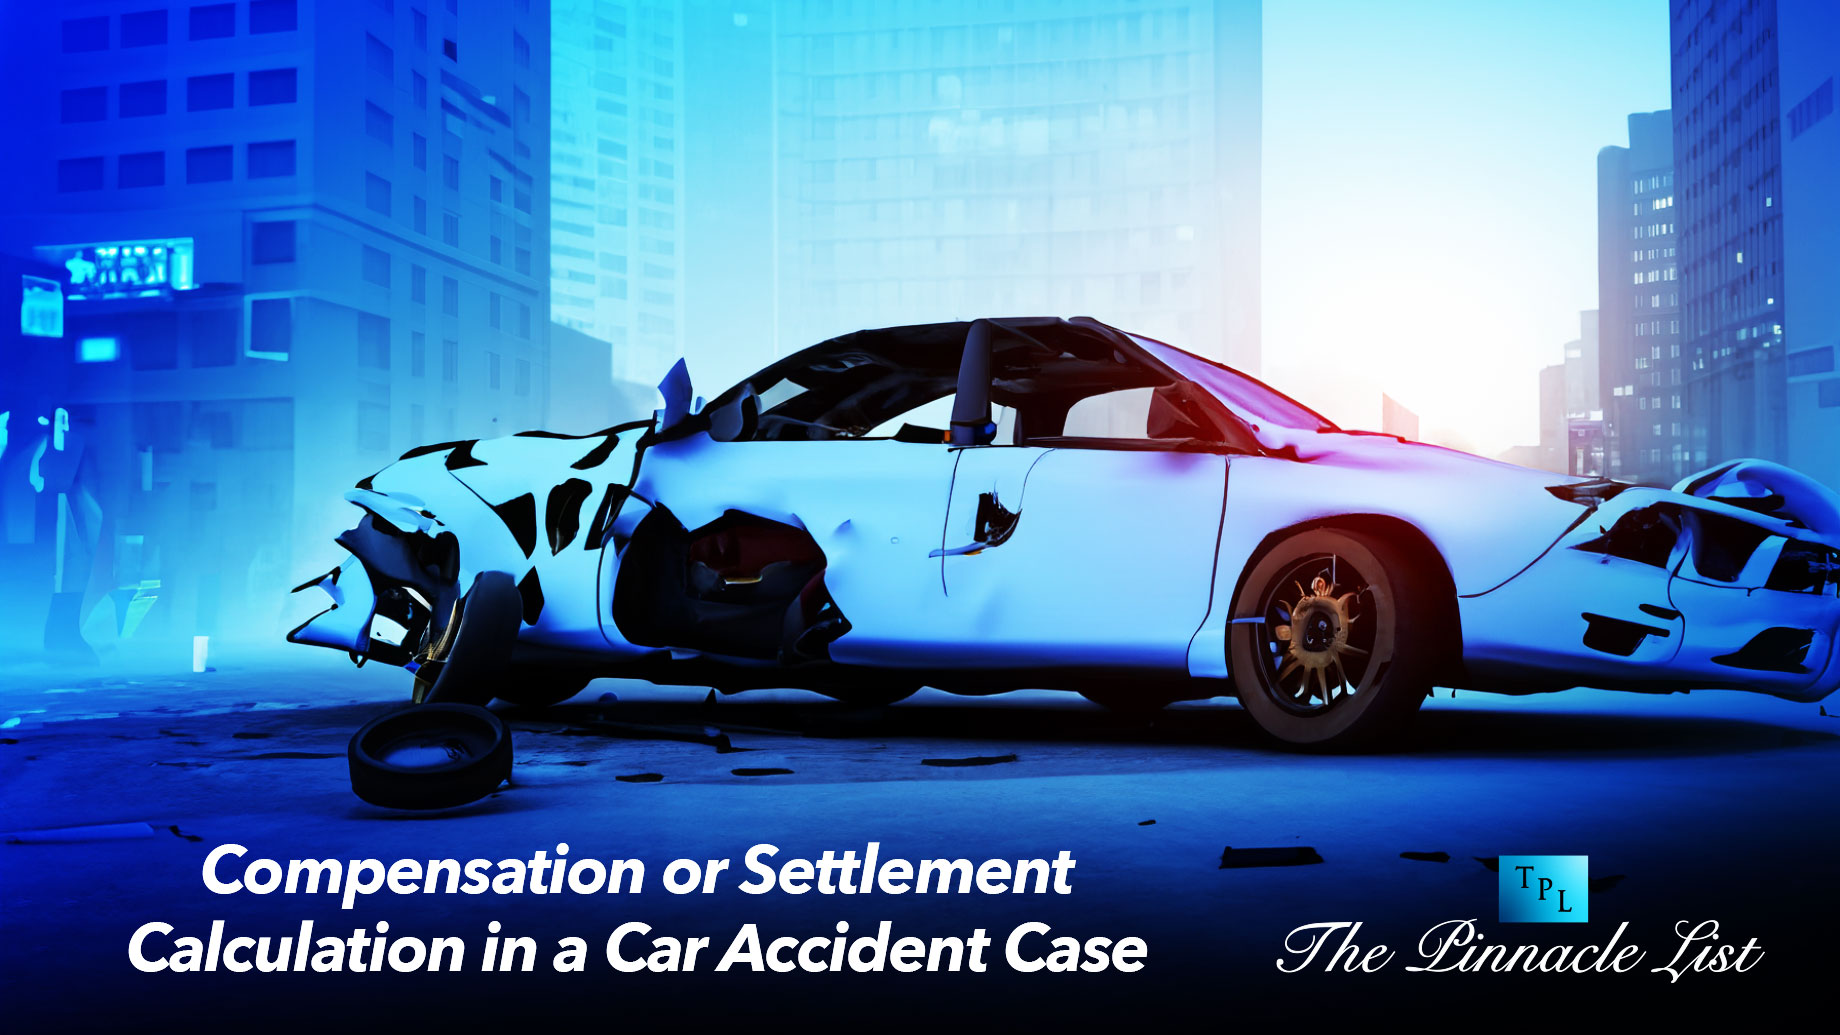 Compensation or Settlement Calculation in a Car Accident Case